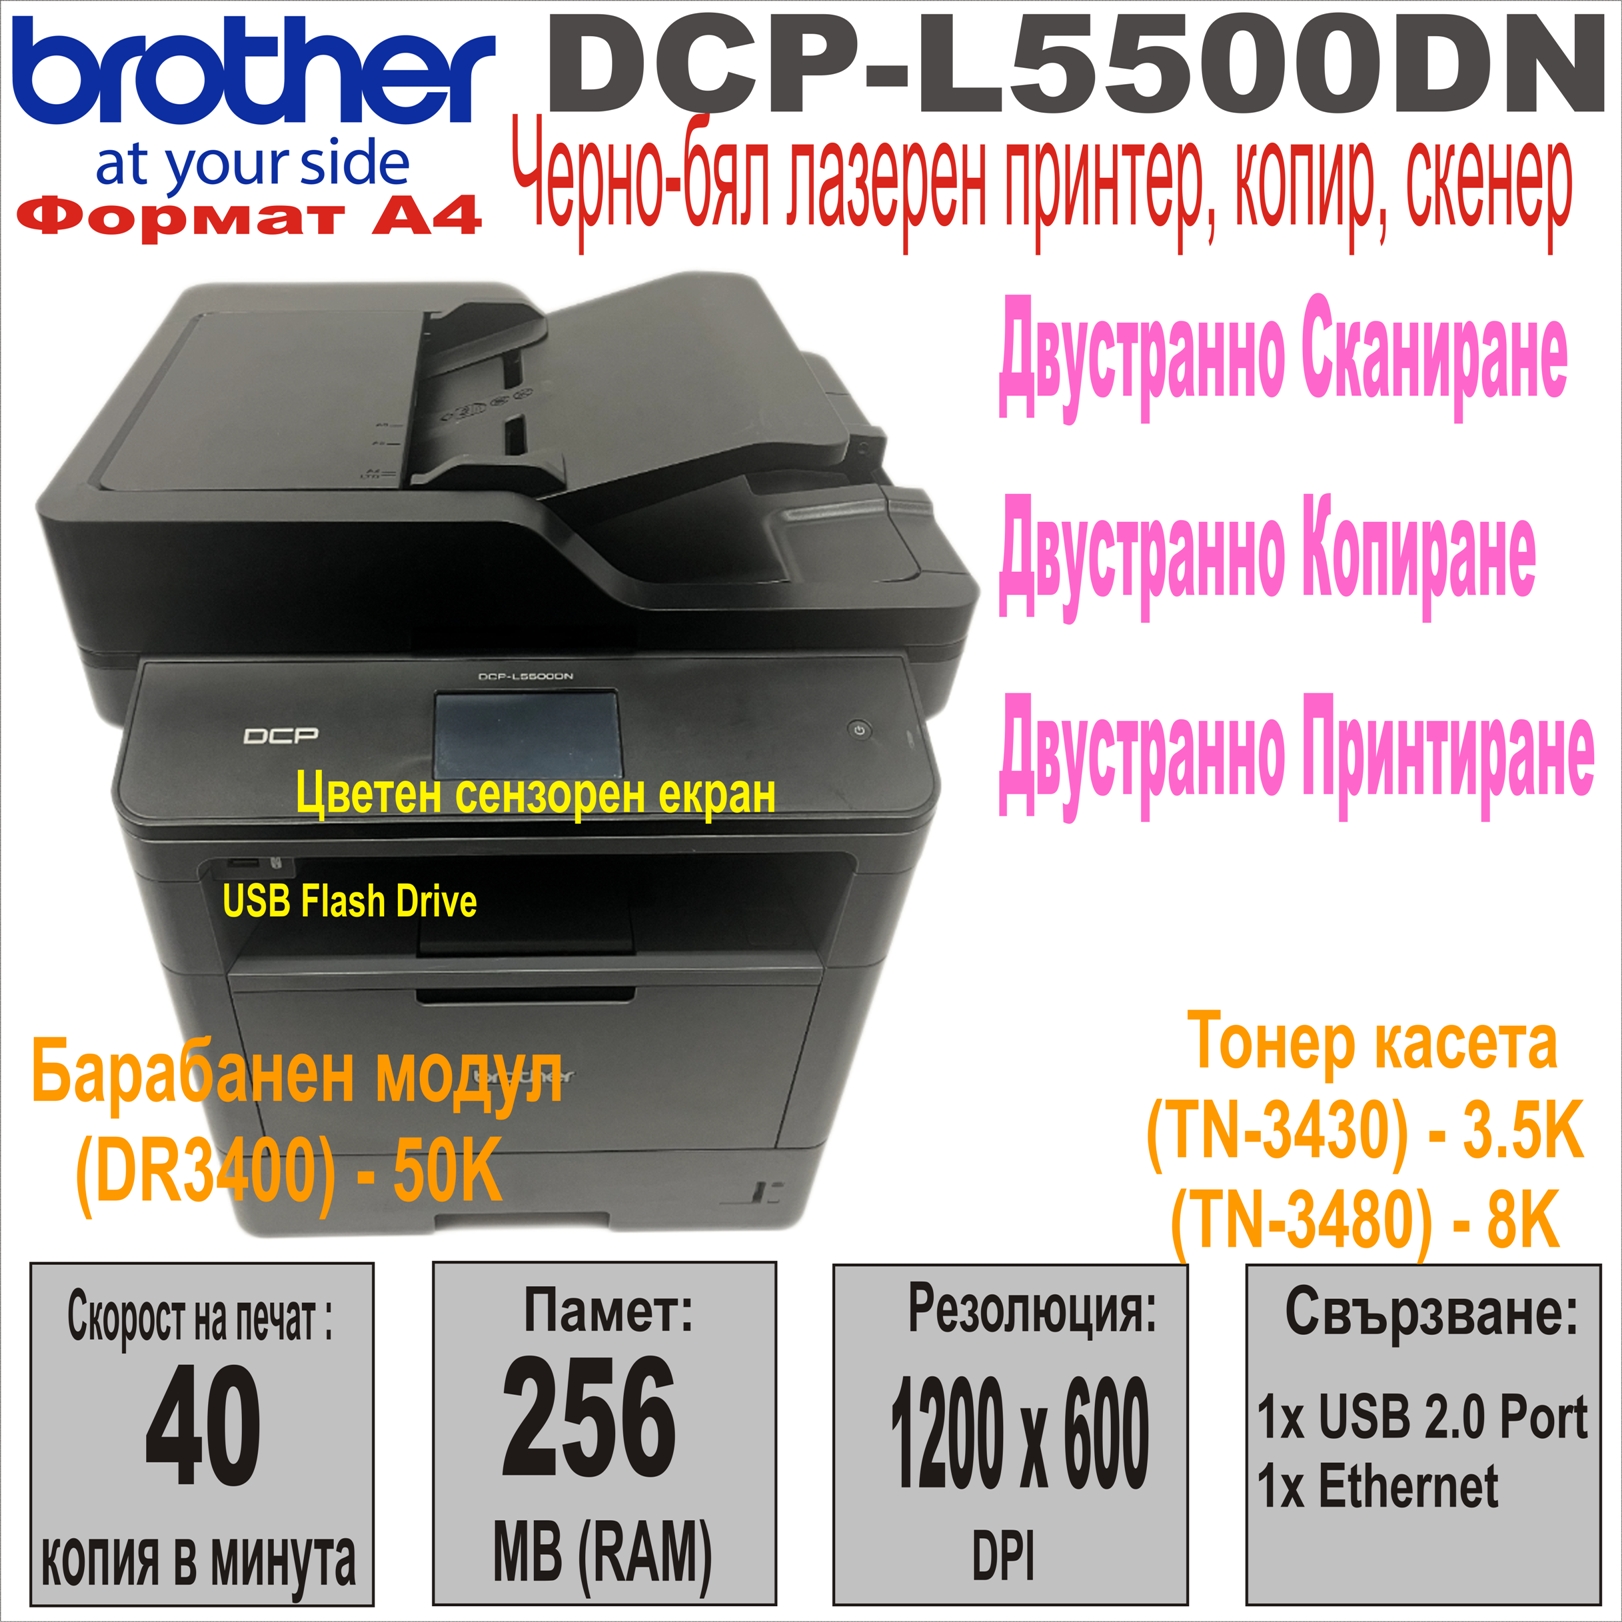 All-in-One Printer BROTHER DCP-L5500DN